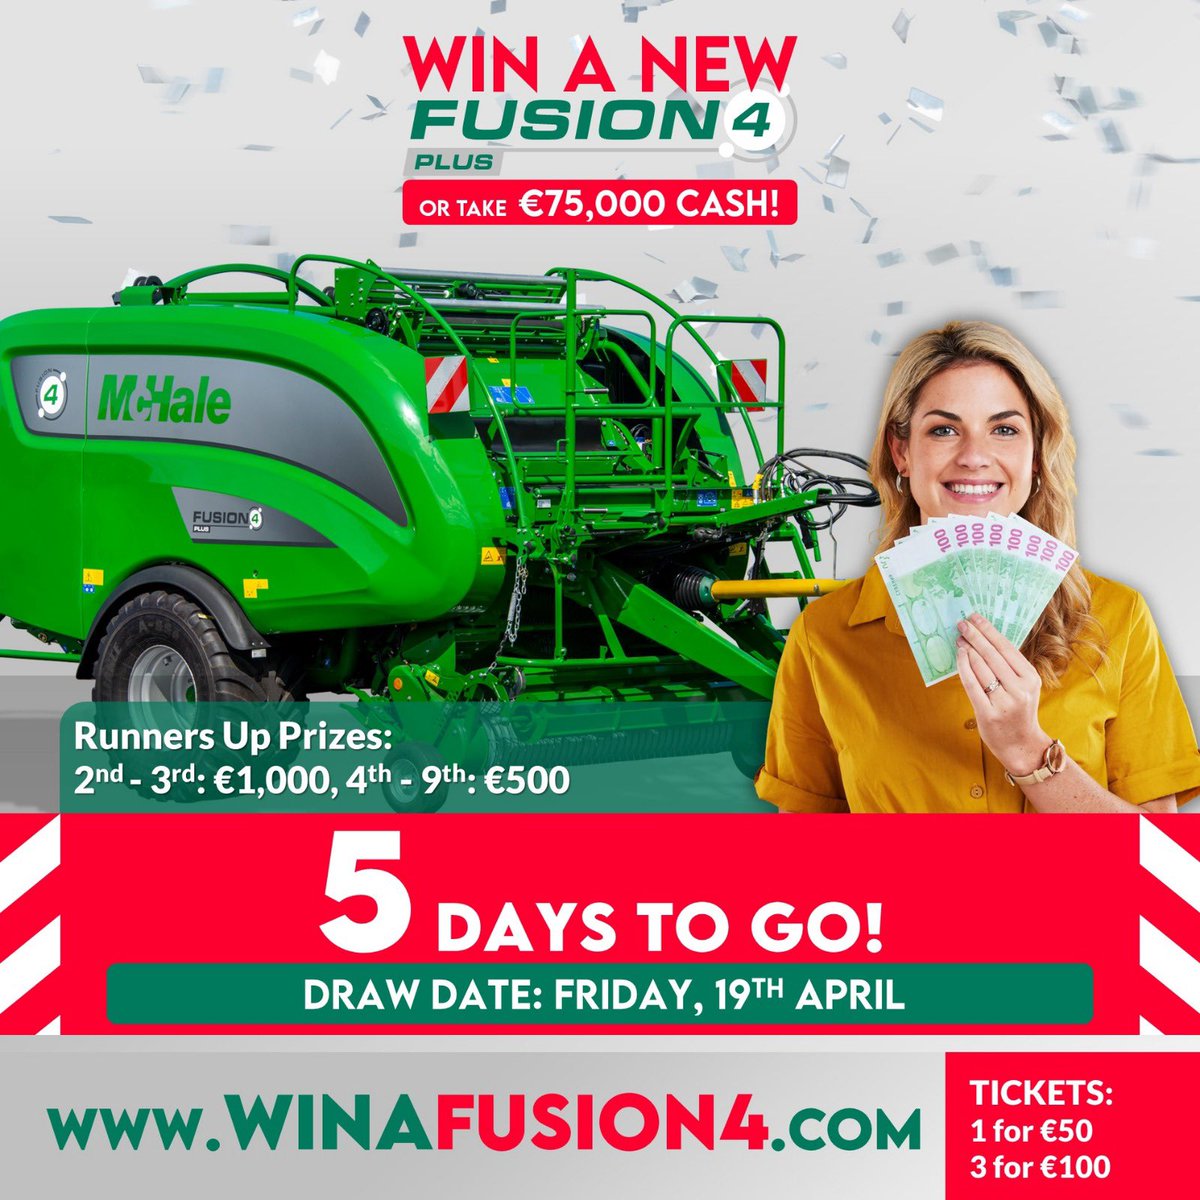 '🎉 DAY 5 to winning a McHale Fusion Baler or €75,000 🚜💰 Kilmaine GAA's fundraising countdown is in full swing 🙌🤑 Don't miss your chance, grab a ticket now and join the suspense at winafusion4.com! #winafusion4 @MayoGAA @ConnachtGAA